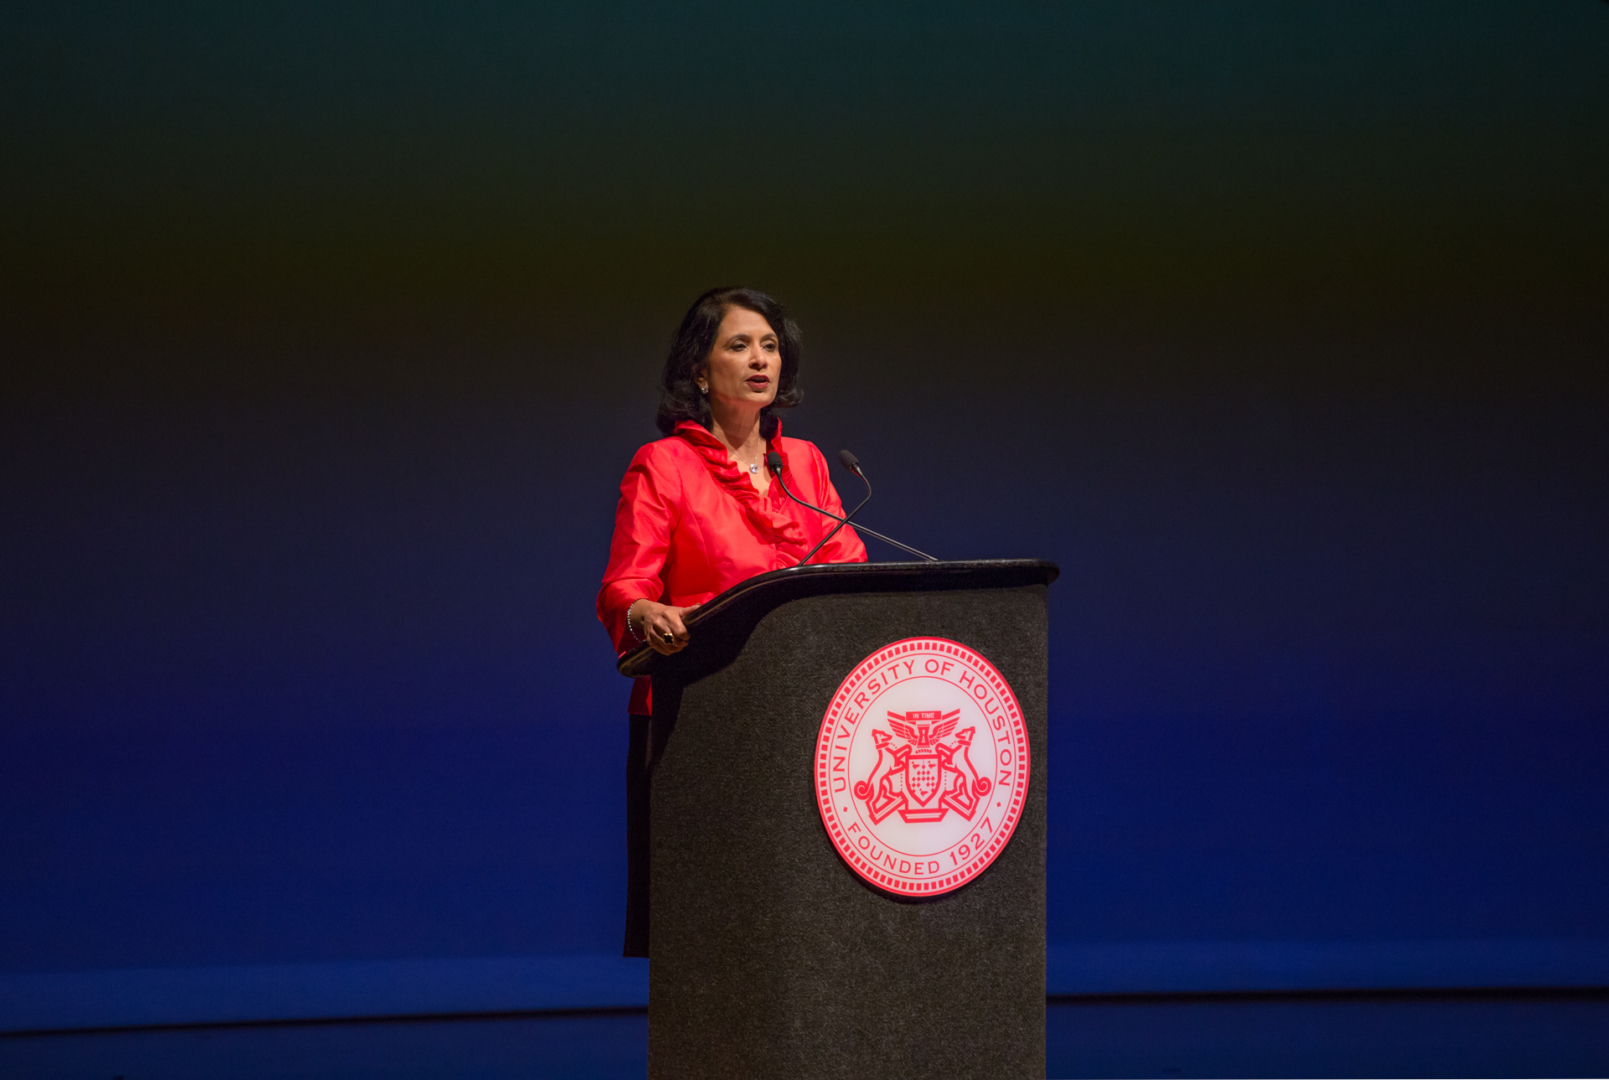 This year UH received a $50 million anonymous donation that will go to hiring “distinguished” faculty and supporting four new institutions | Trevor Nolley, The Cougar